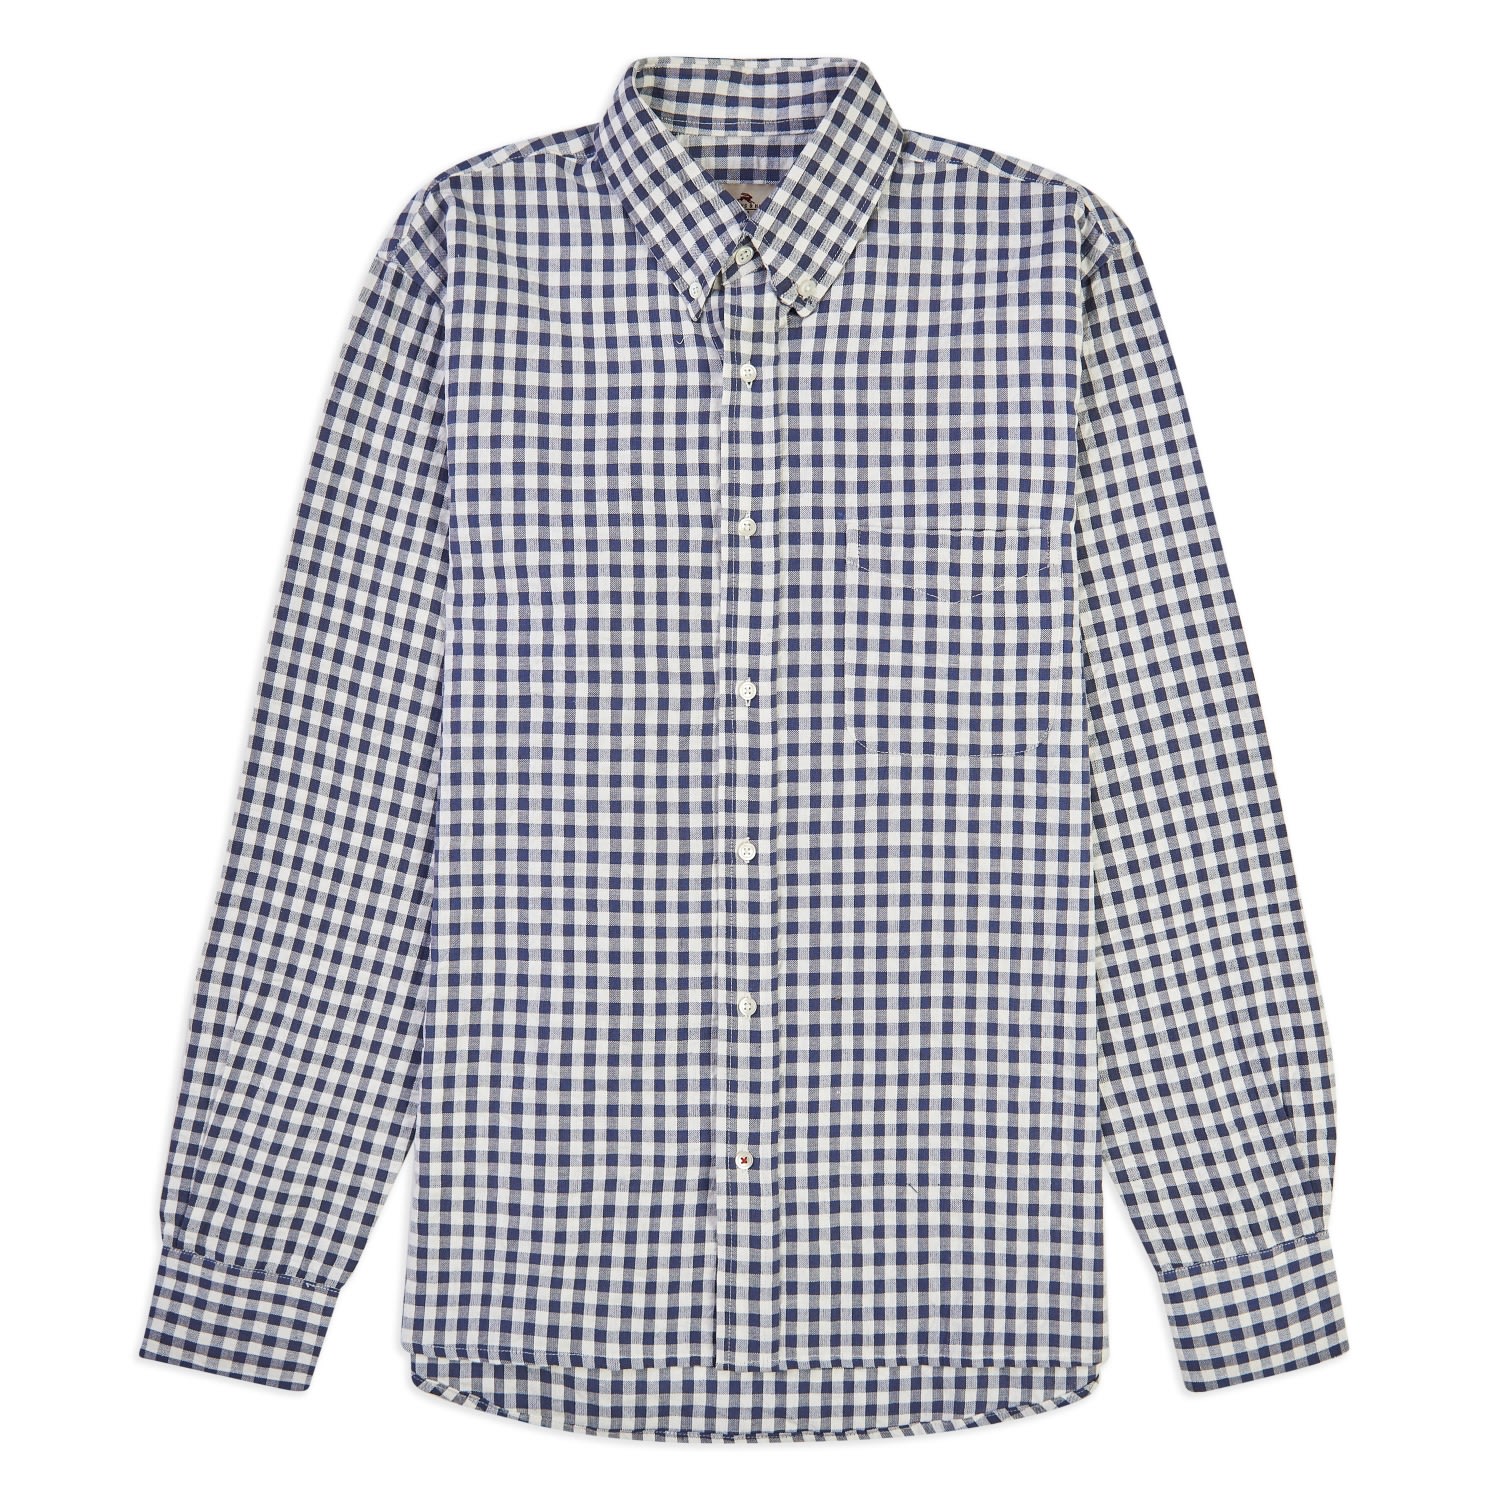 Men's Gingham Button Down Shirt - Blue Large Burrows & Hare